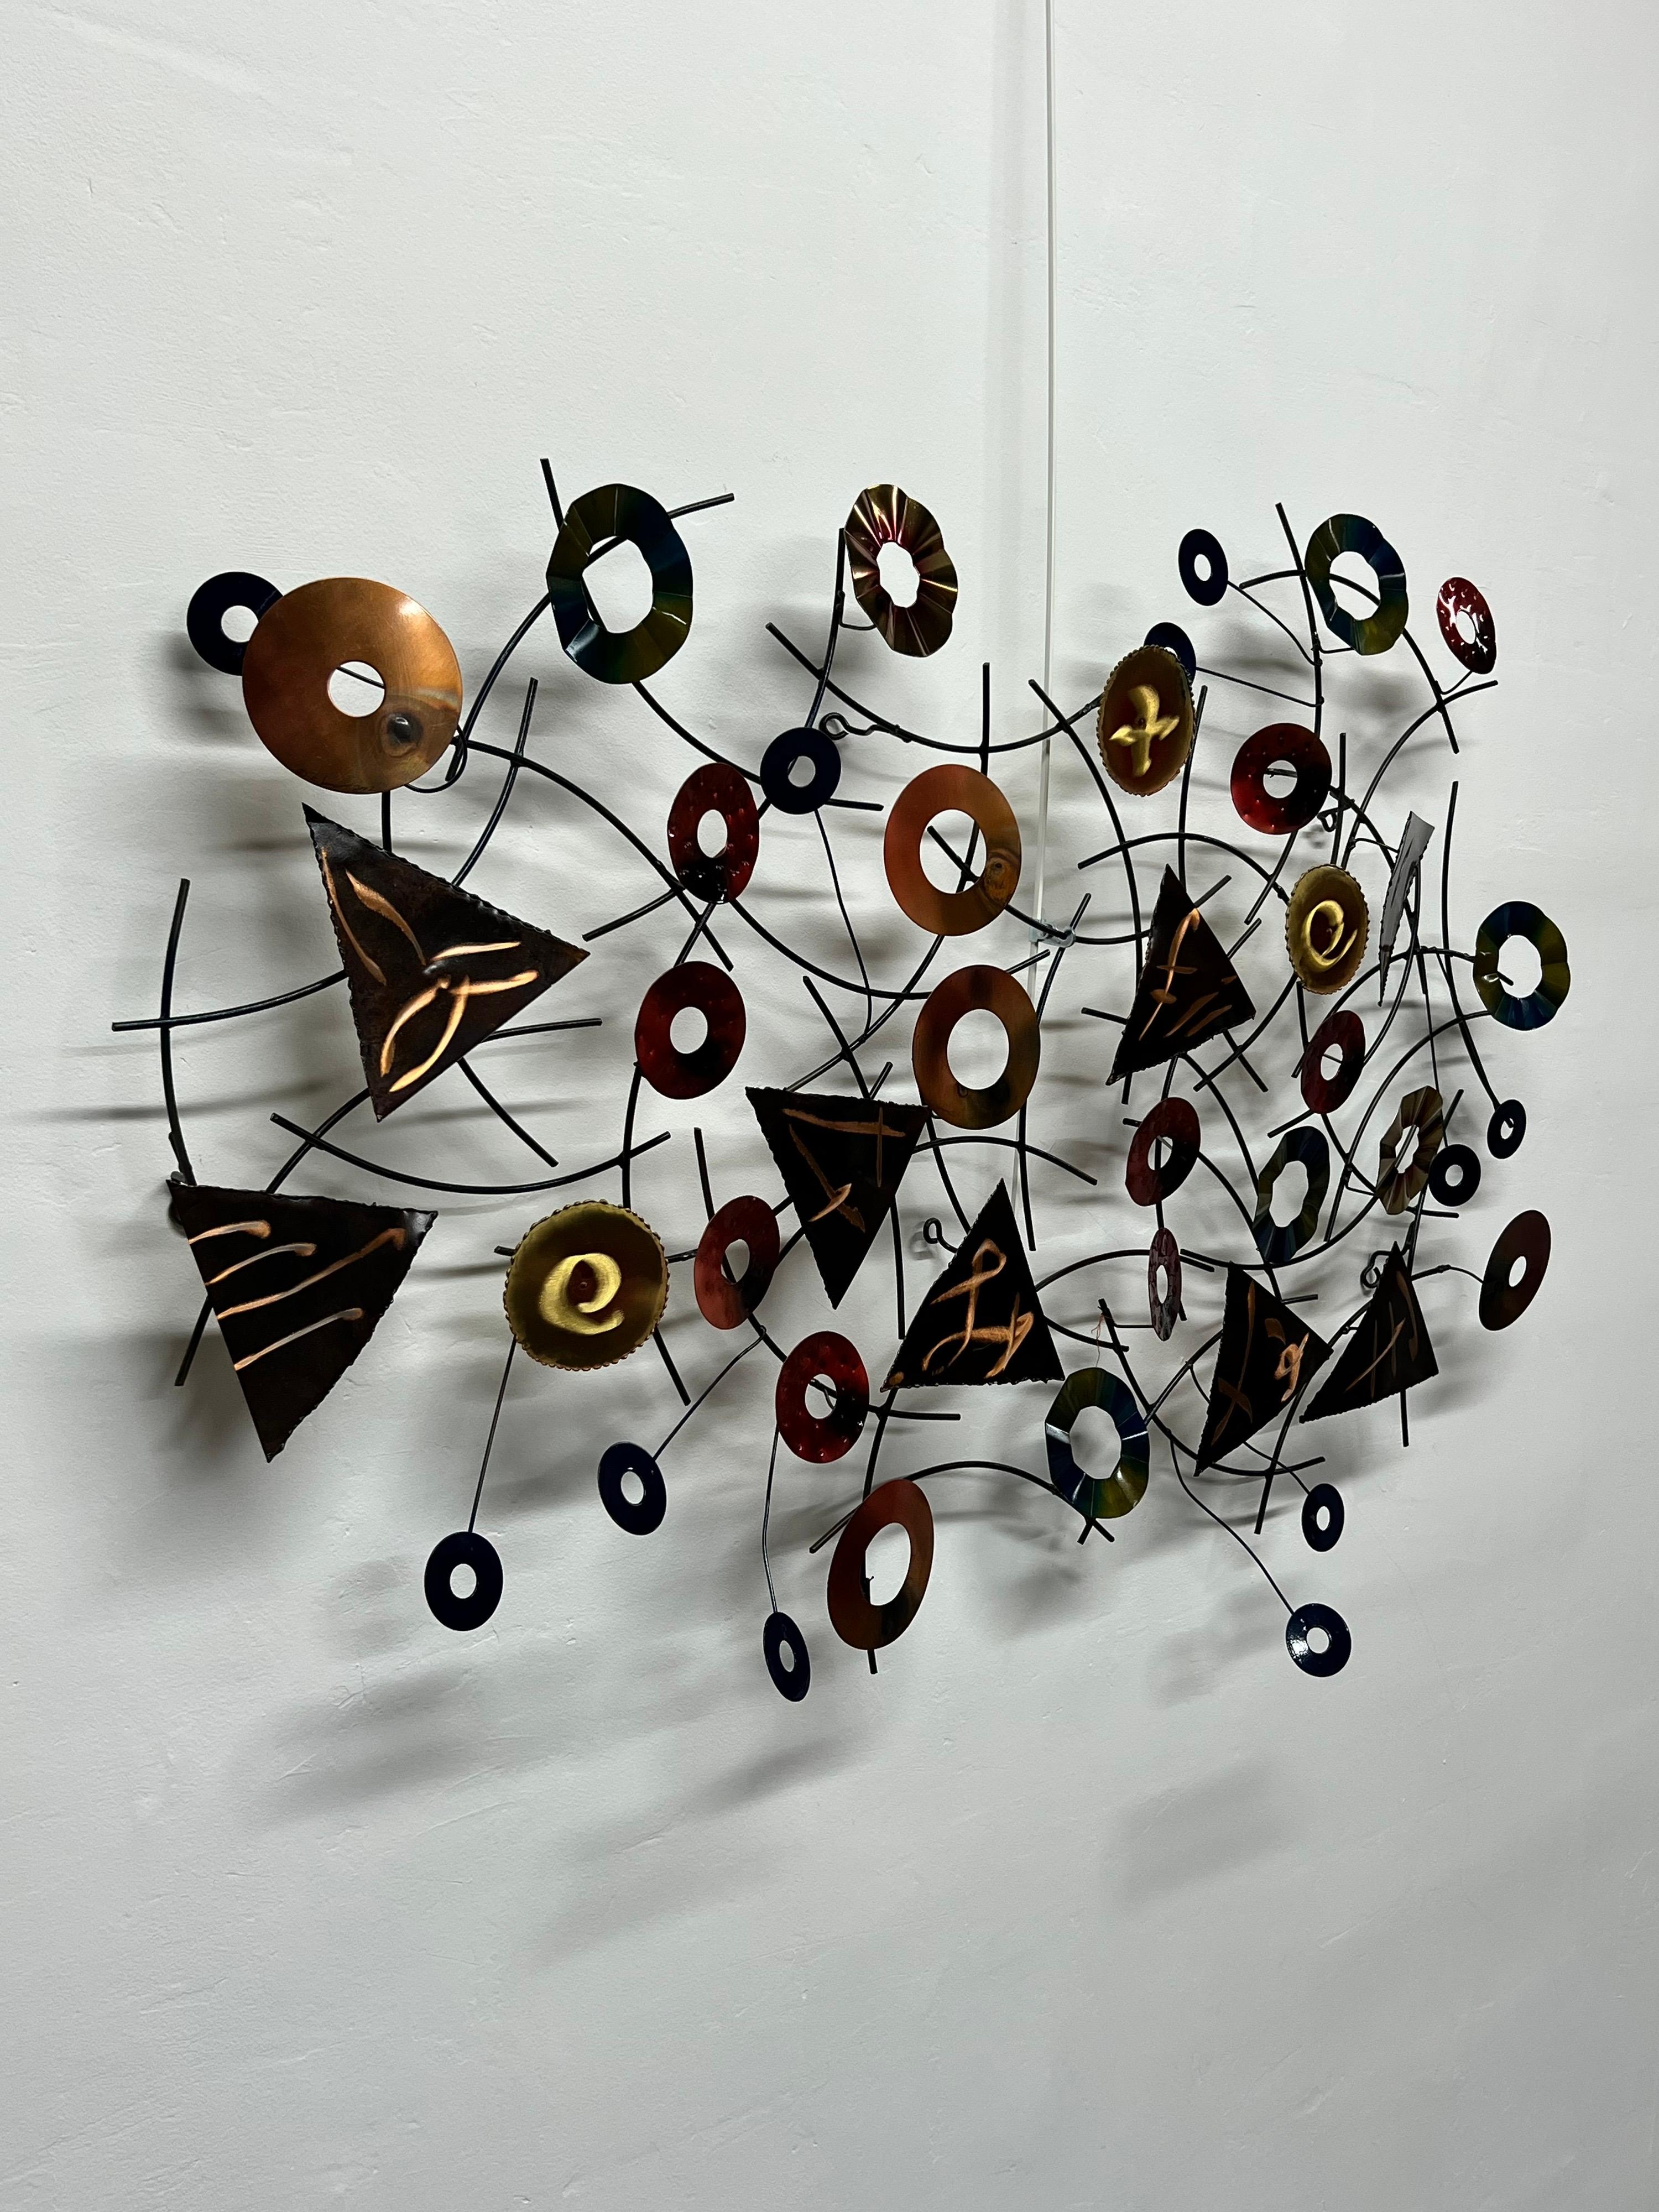 Contemporary mixed-media wall art sculpture fabricated by the artisan house Curtis Jere (C. Jere Artisan House). Dated 2002.
     